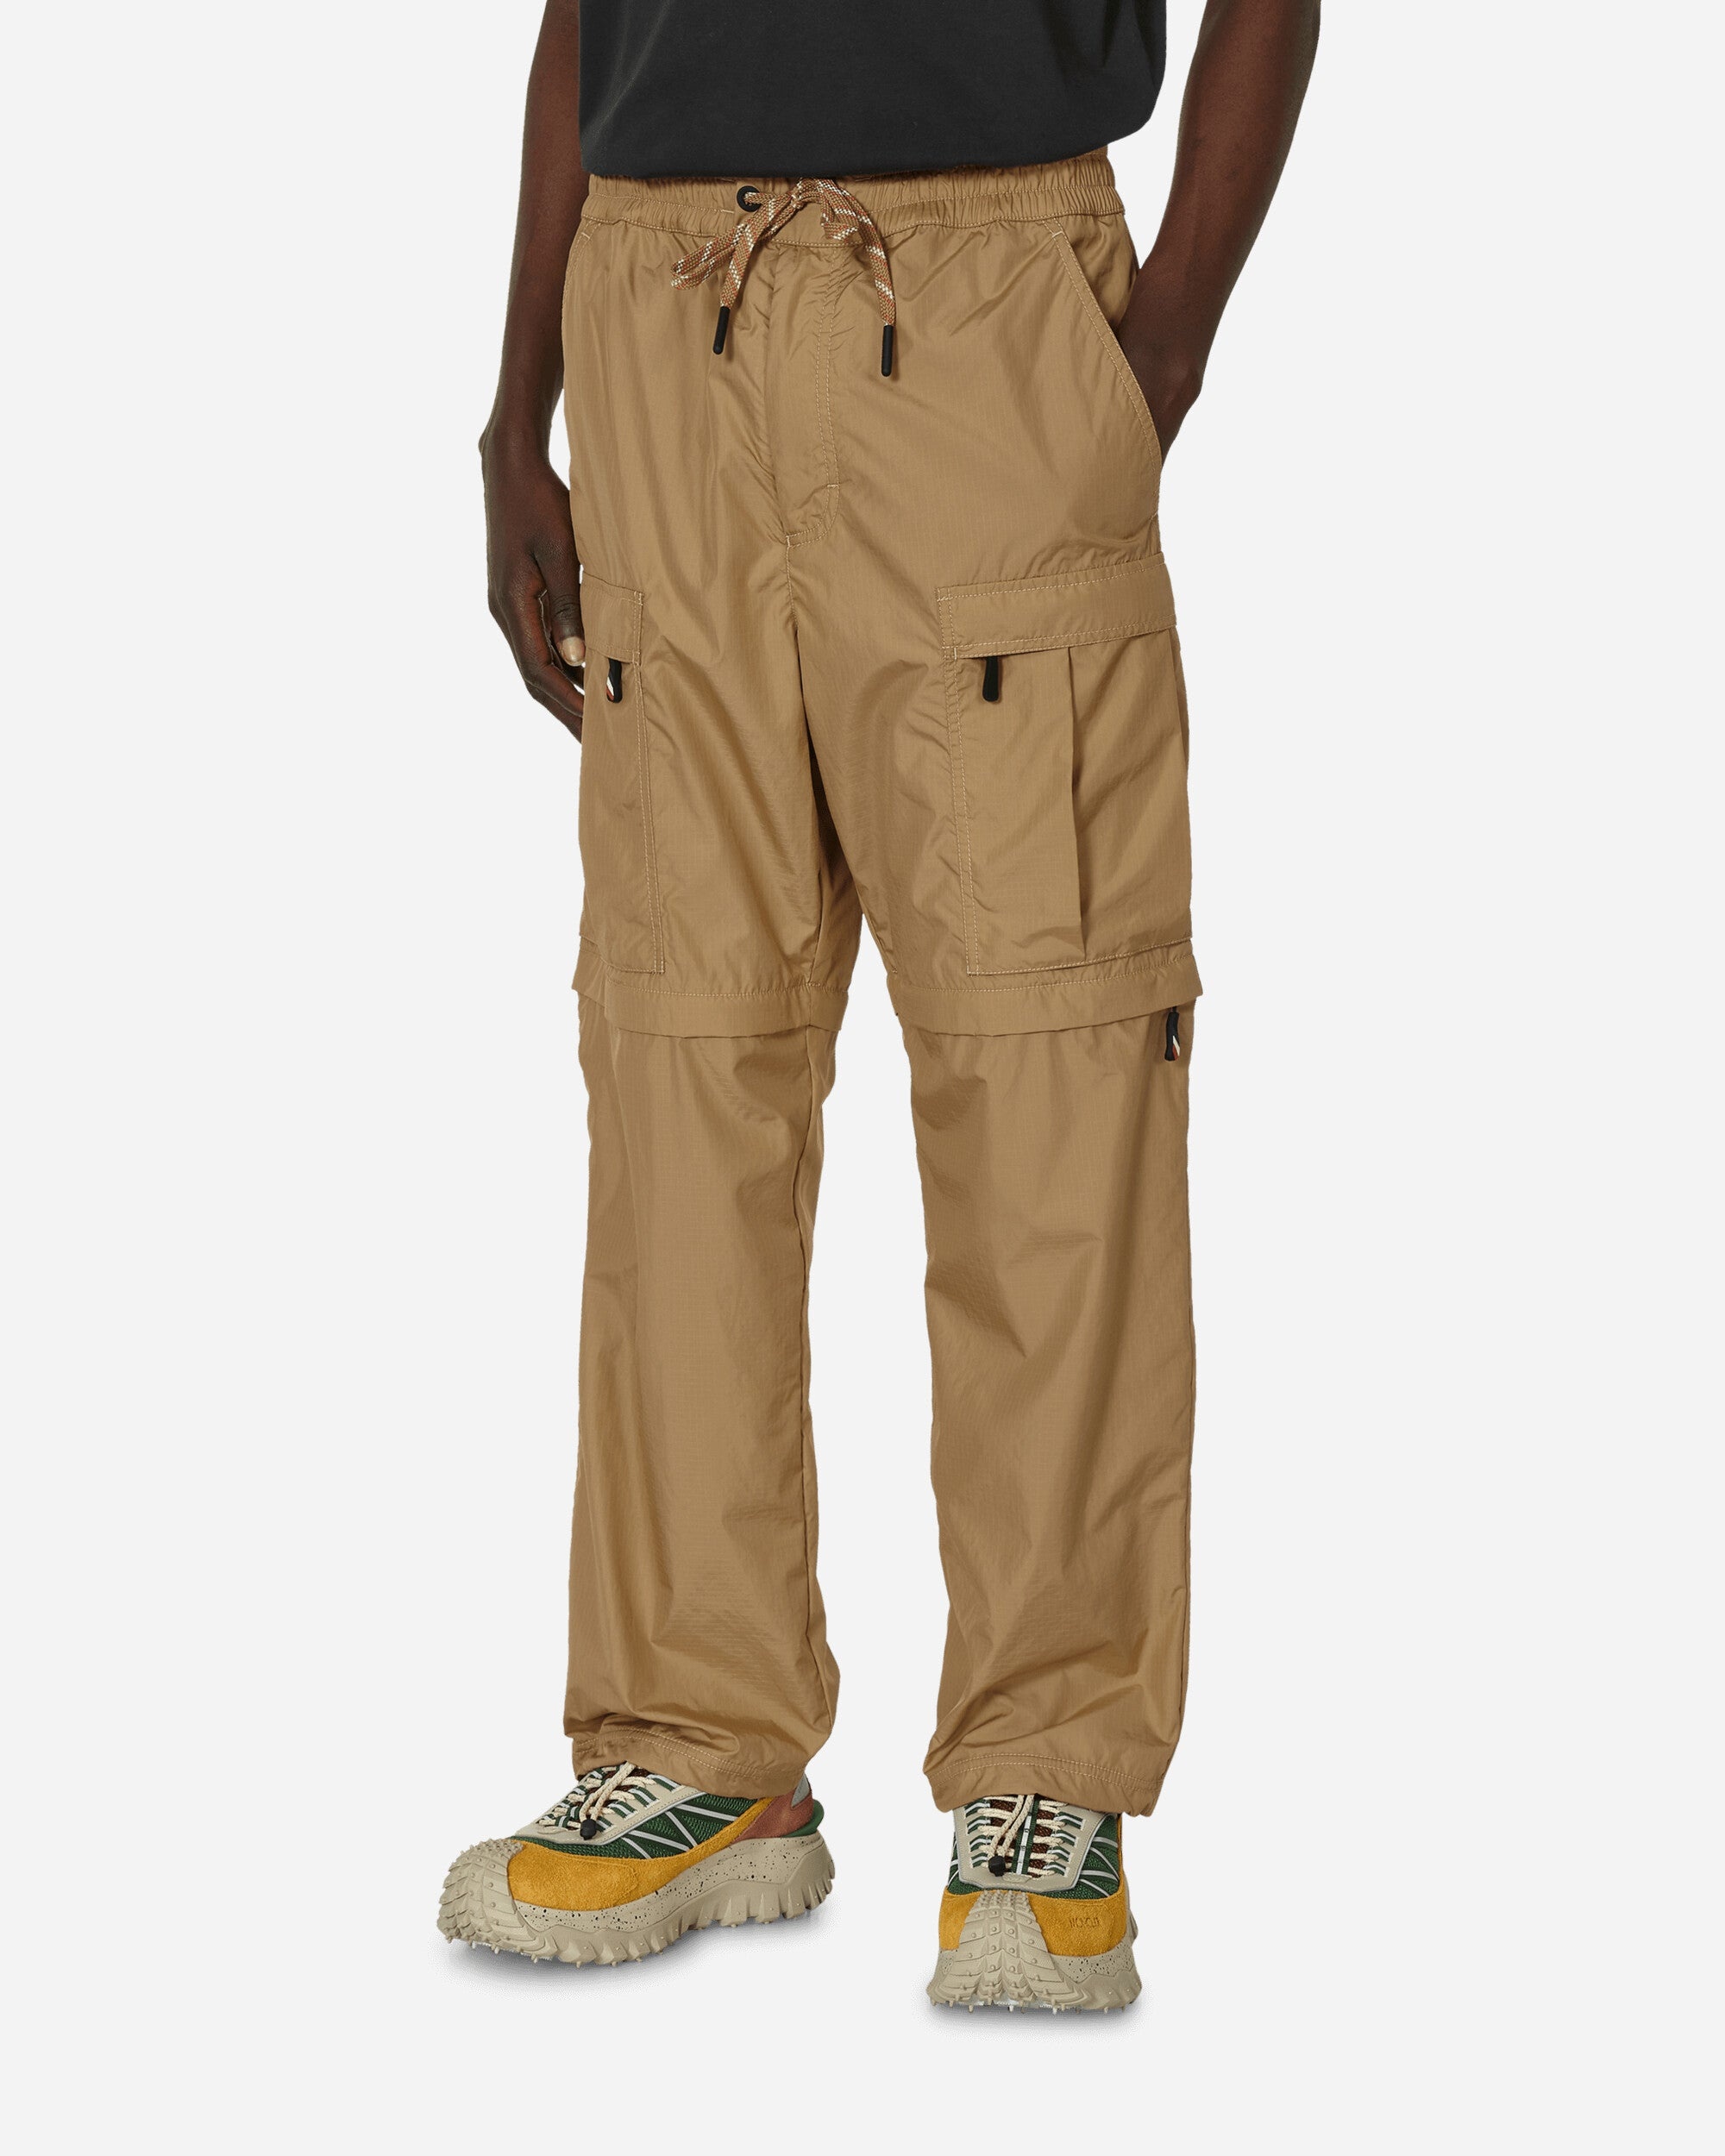 Day-Namic Convertible Cargo Pants Beige - 1